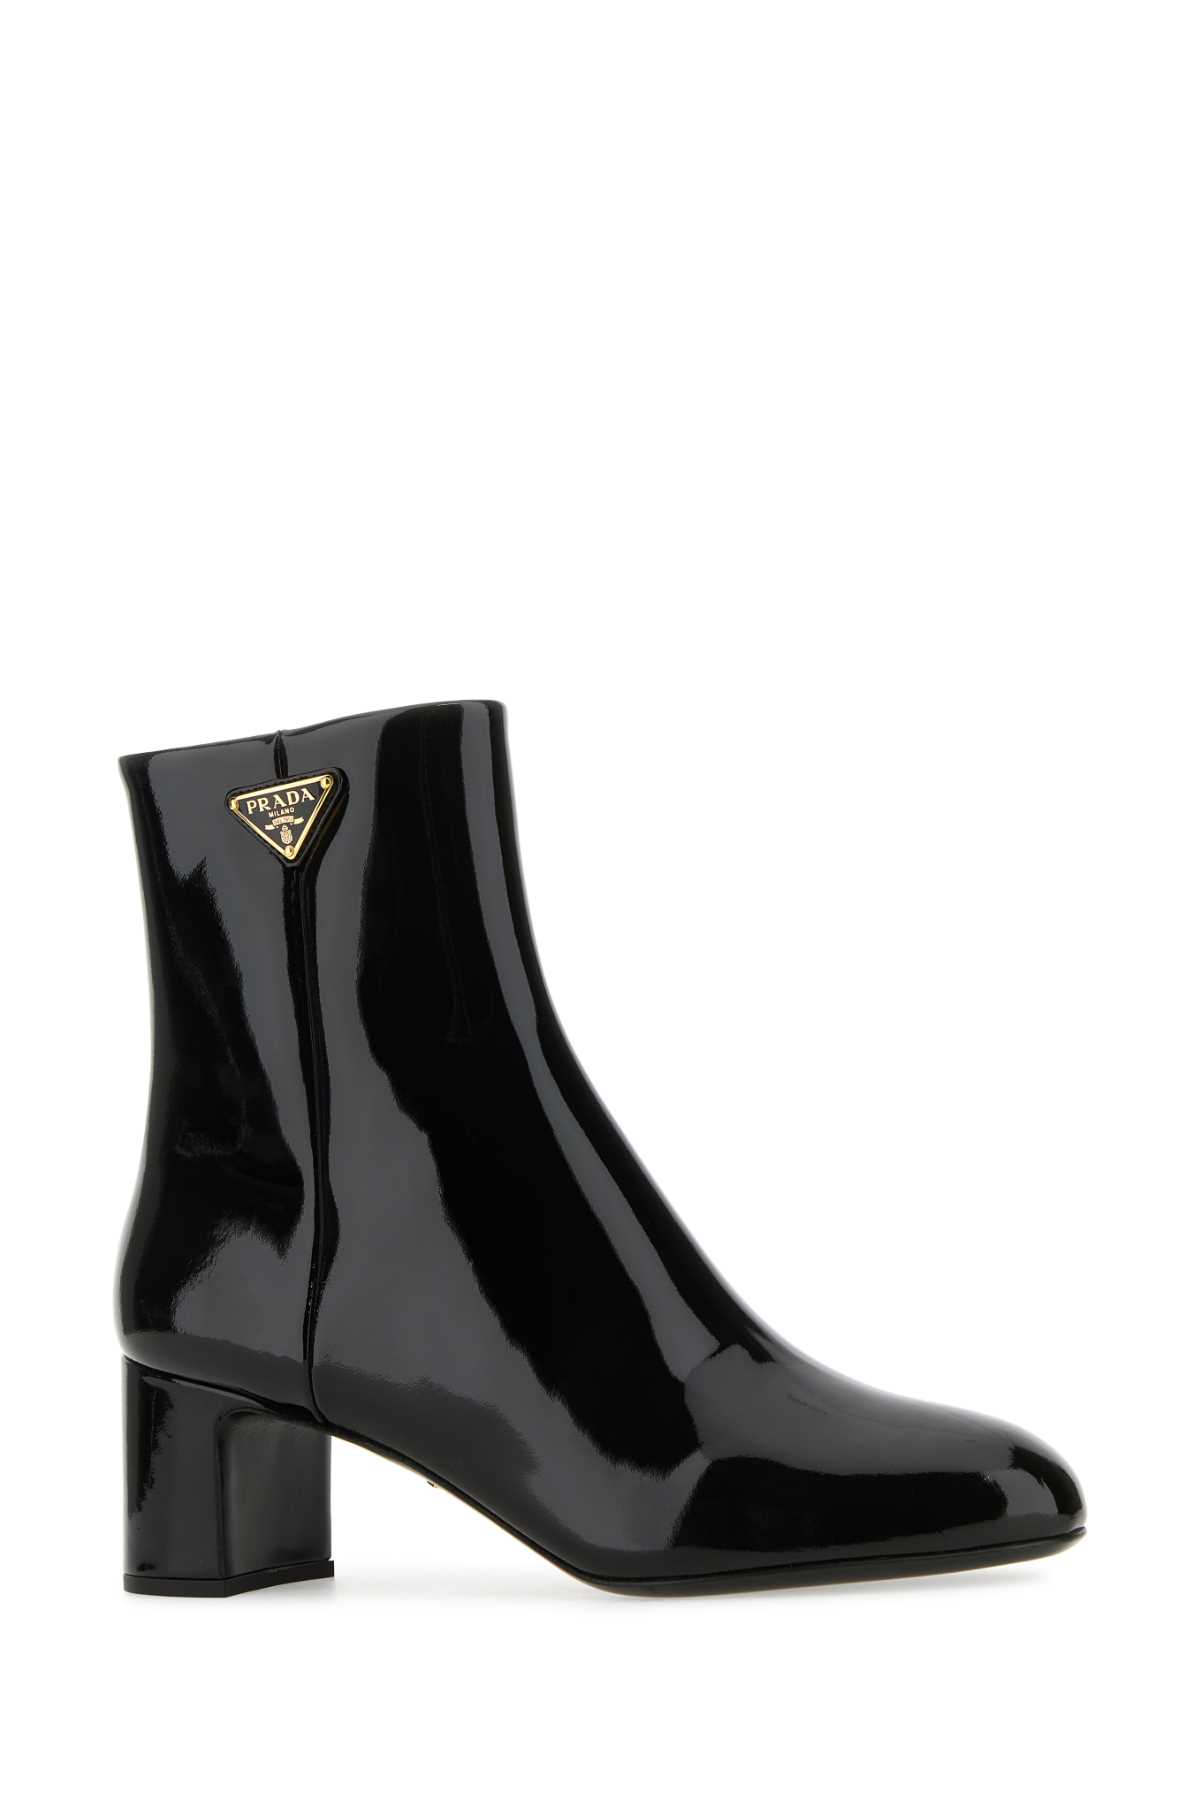 Prada Black Leather Ankle Boots In Nero